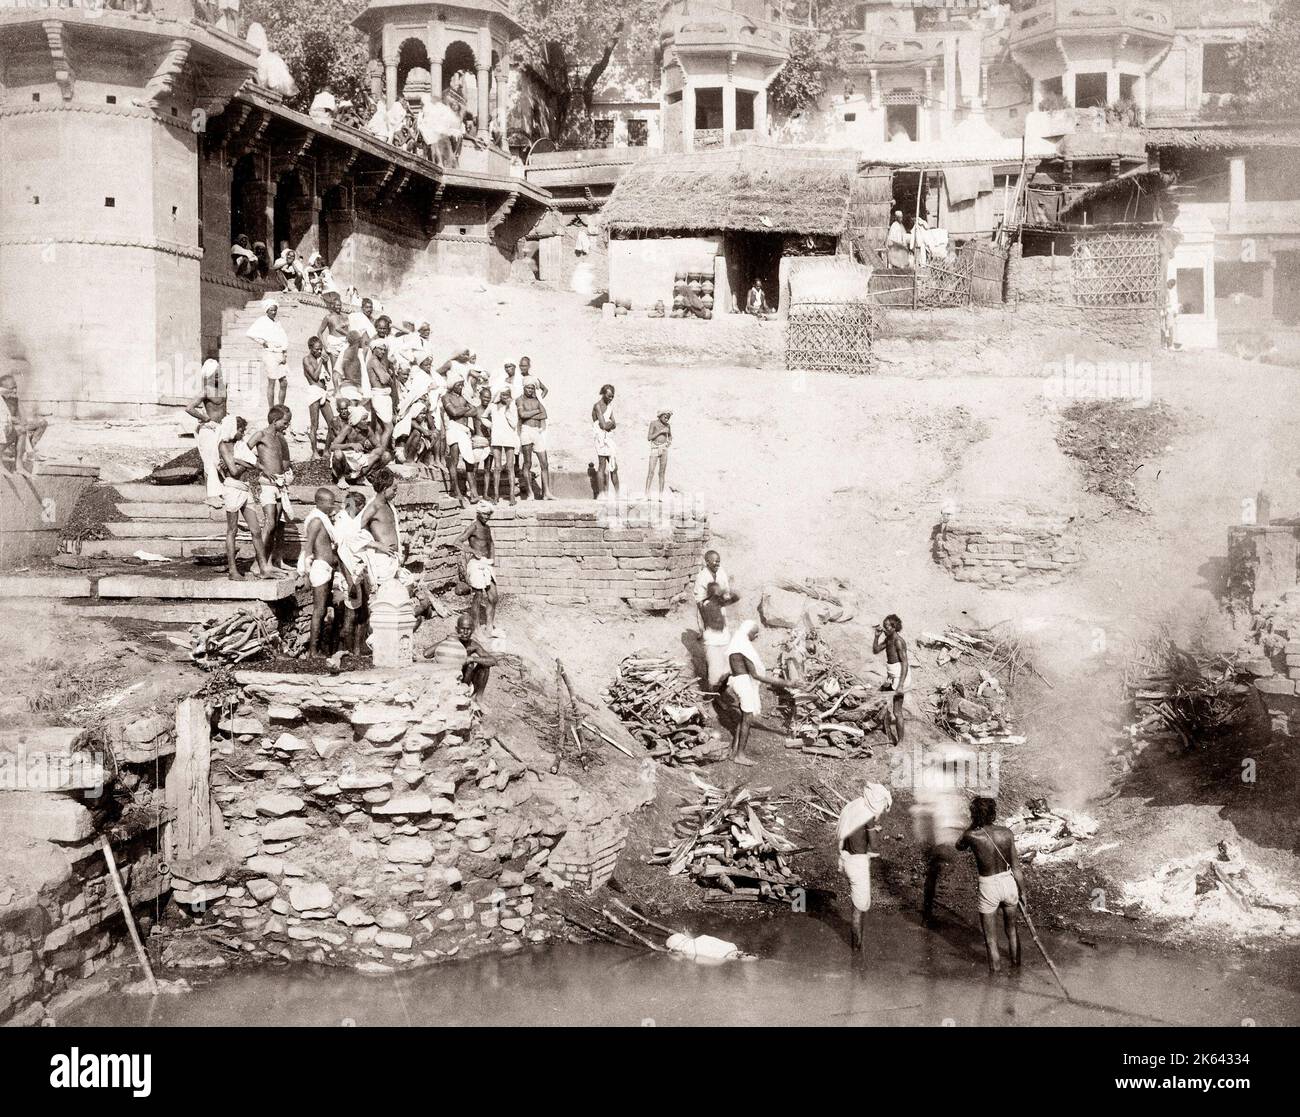 c.1880s India - burning ghat for cremation dead bodies on the Ganges at Benares Varanasi Stock Photo